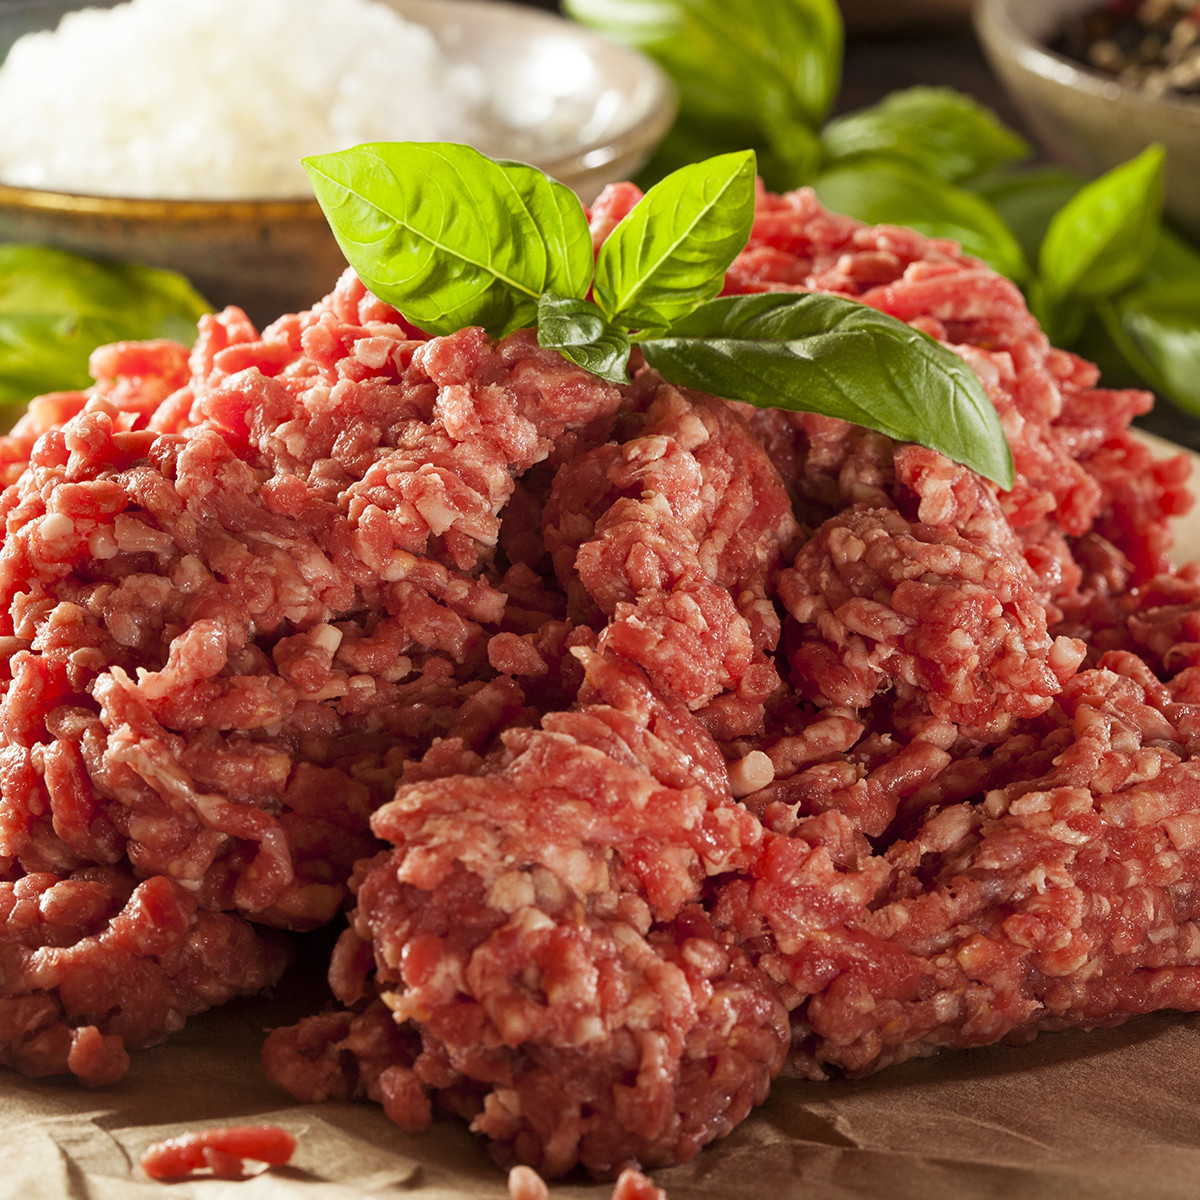 What To Do With Ground Beef
 Organic Grass Fed Ground Beef 1 lb Dr King s Farms